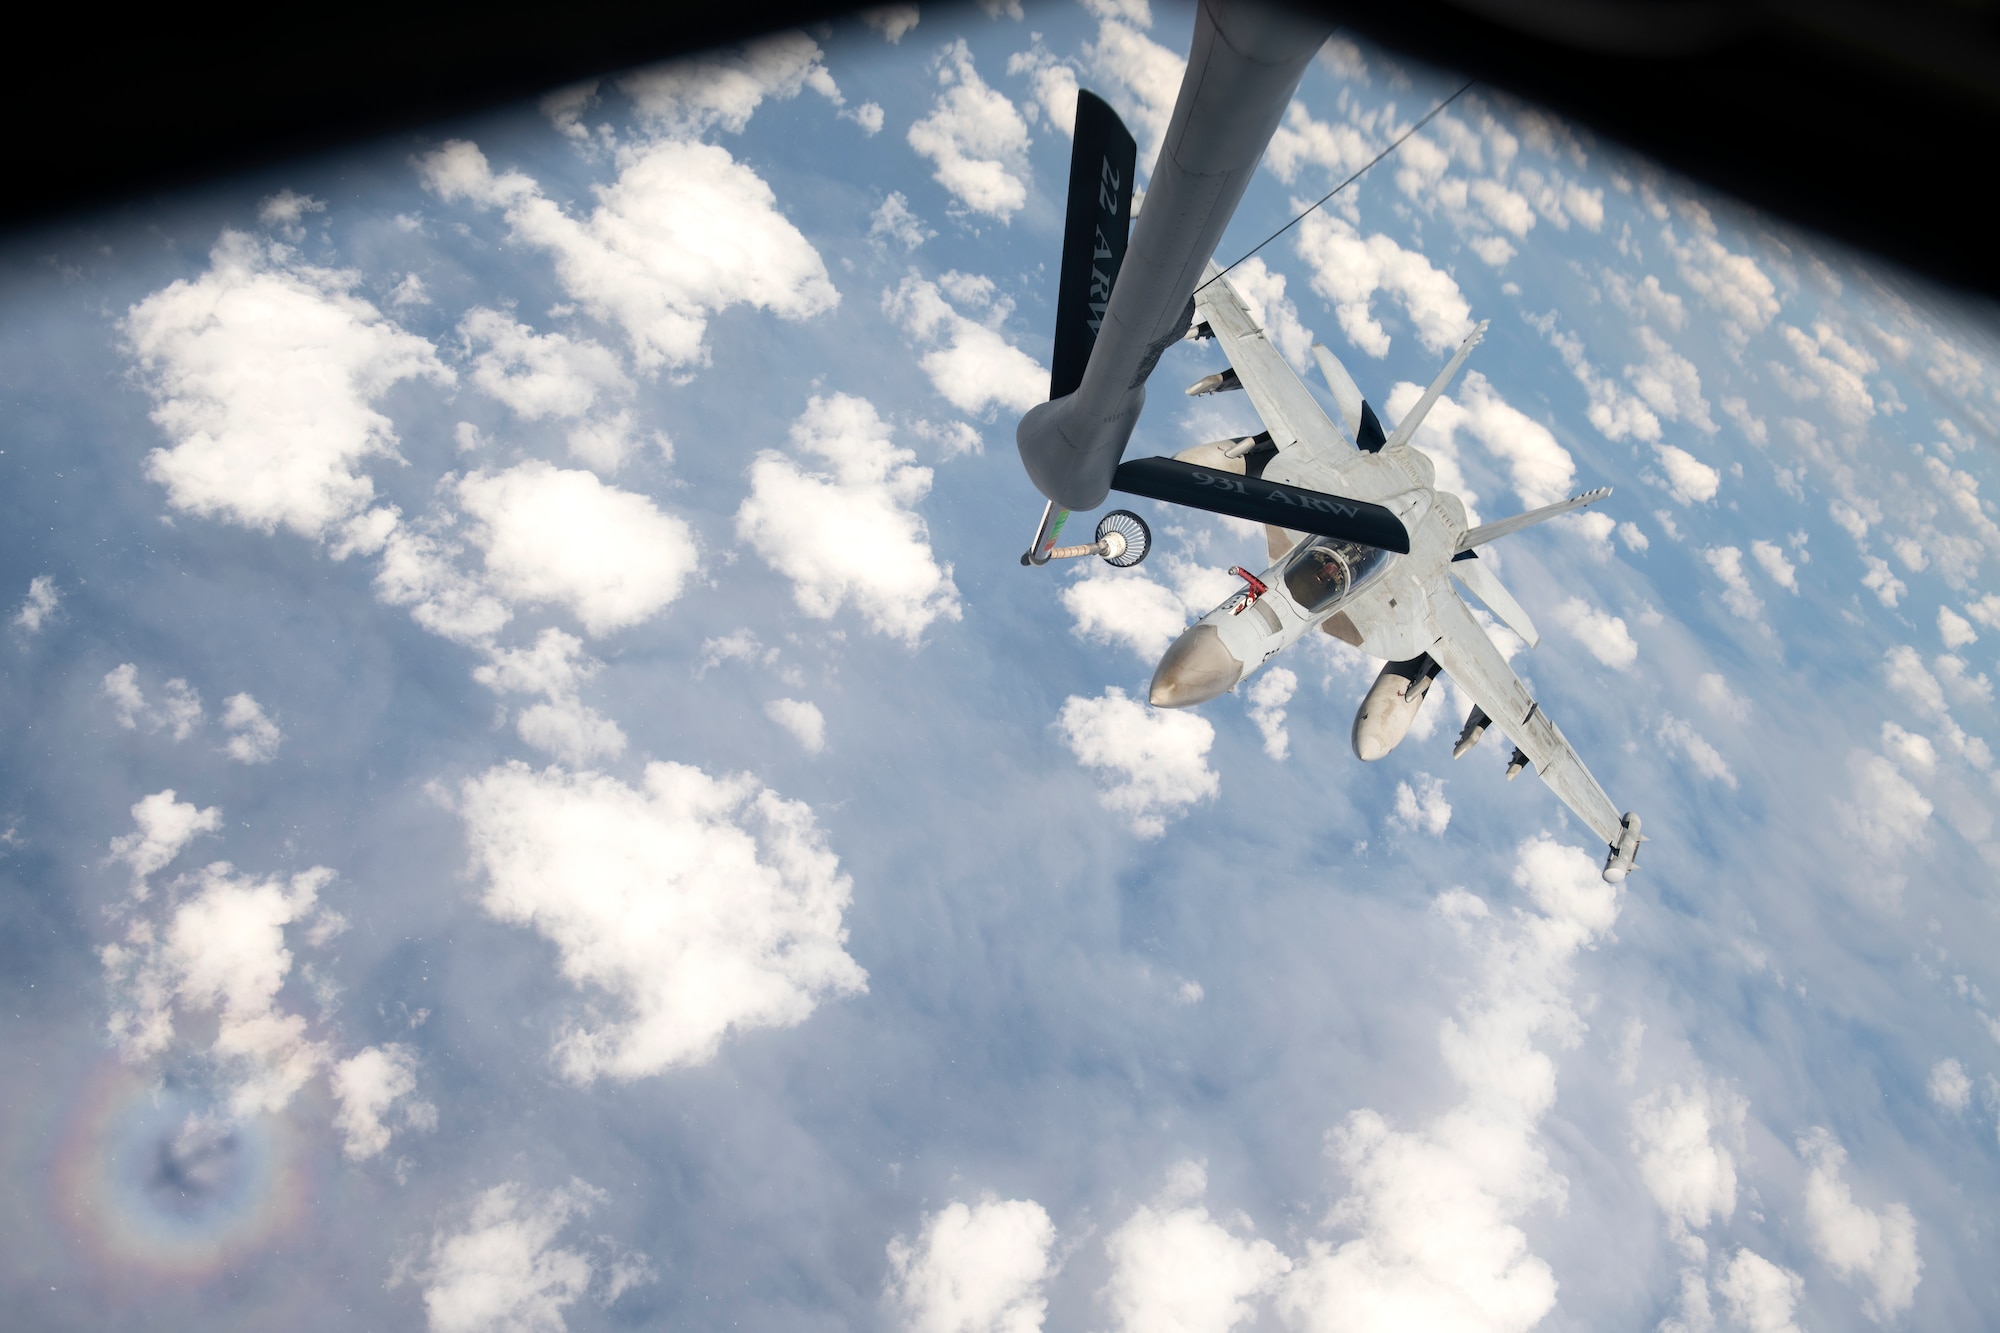 A U.S. Navy F/A-18 Super Hornet approaches a KC-135 Stratotanker assigned to the 909th Air Refueling Squadron during a joint training exercise over the Pacific Ocean, Oct. 24, 2022. Interoperability among U.S. military branches is vital to ensuring a free and open Indo-Pacific by demonstrating the ability to seamlessly integrate and accomplish the mission as one cohesive team. (U.S. Air Force photo by Senior Airman Jessi Roth)